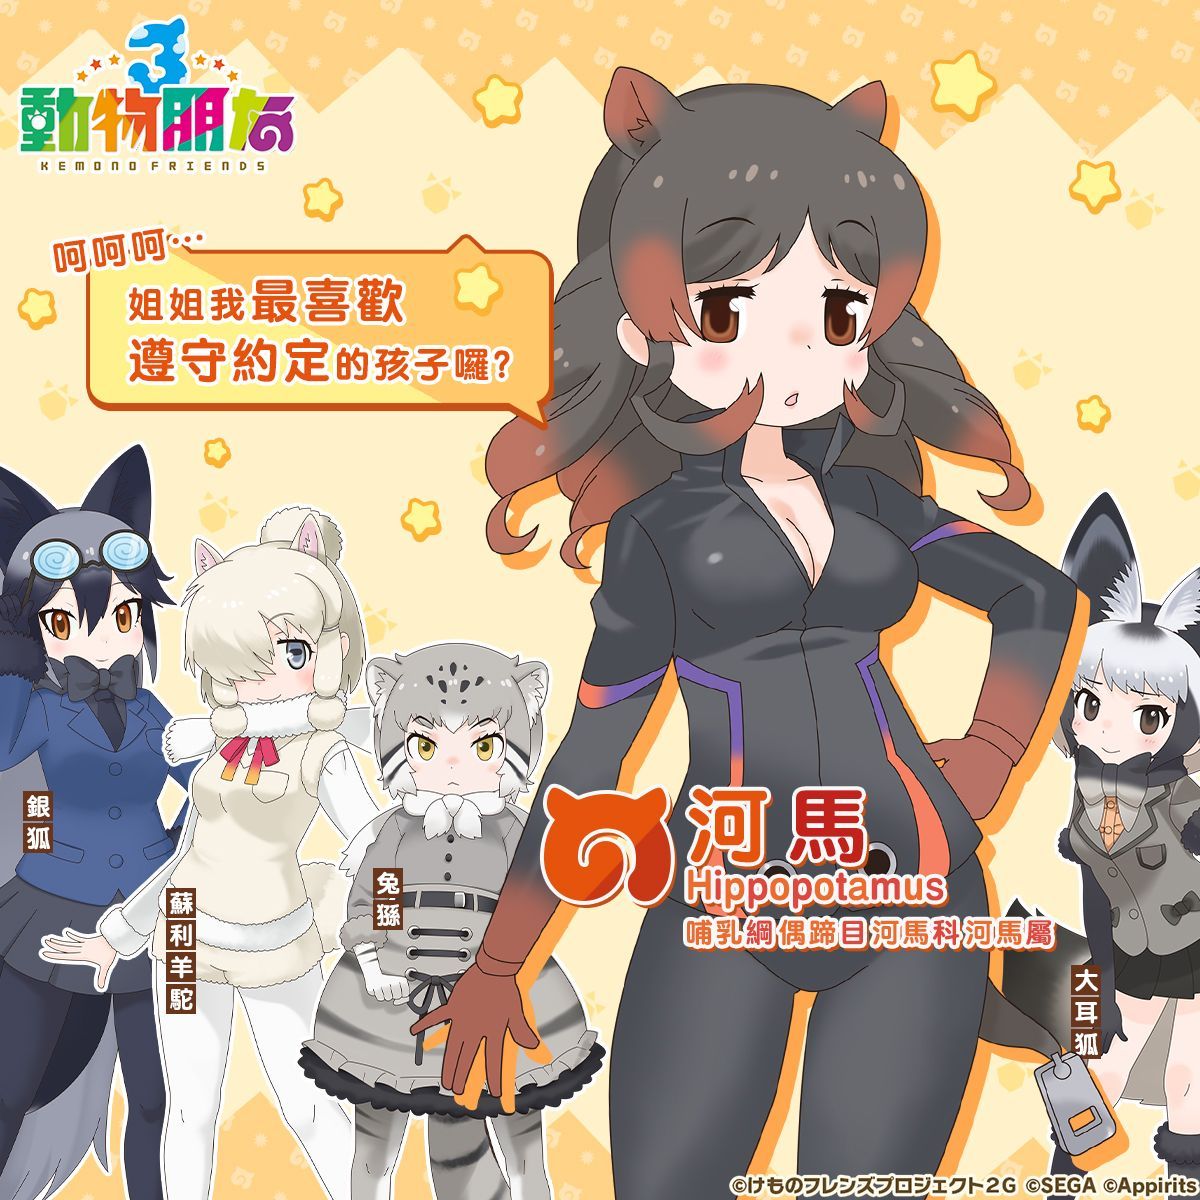 5girls alpaca_suri_(kemono_friends) animal_ears bat-eared_fox_(kemono_friends) belt black_hair blazer boots bow bowtie chinese_text copyright_name extra_ears glasses gloves grey_hair highres hippopotamus_(kemono_friends) jacket kemono_friends kemono_friends_3 long_hair looking_at_viewer multicolored_hair multiple_girls necktie official_art pallas's_cat_(kemono_friends) pants pantyhose redhead shirt short_hair shorts silver_fox_(kemono_friends) simple_background skirt tail translation_request two-tone_hair vest